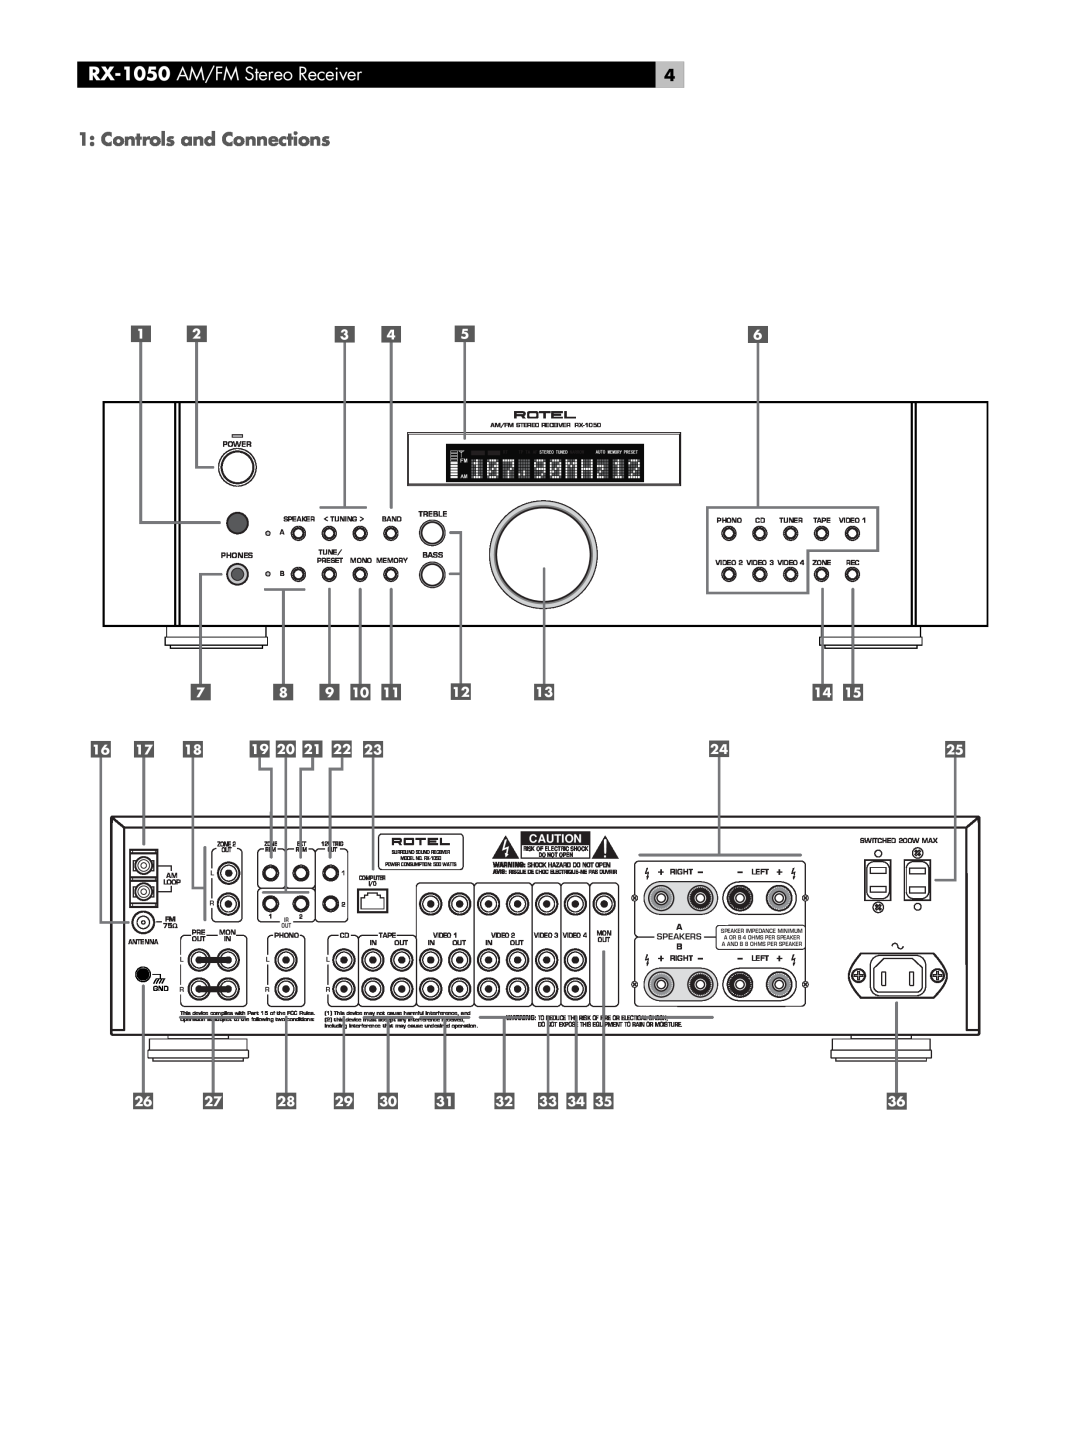 Rotel owner manual RX-1050 AM/FM Stereo Receiver, Controls and Connections 